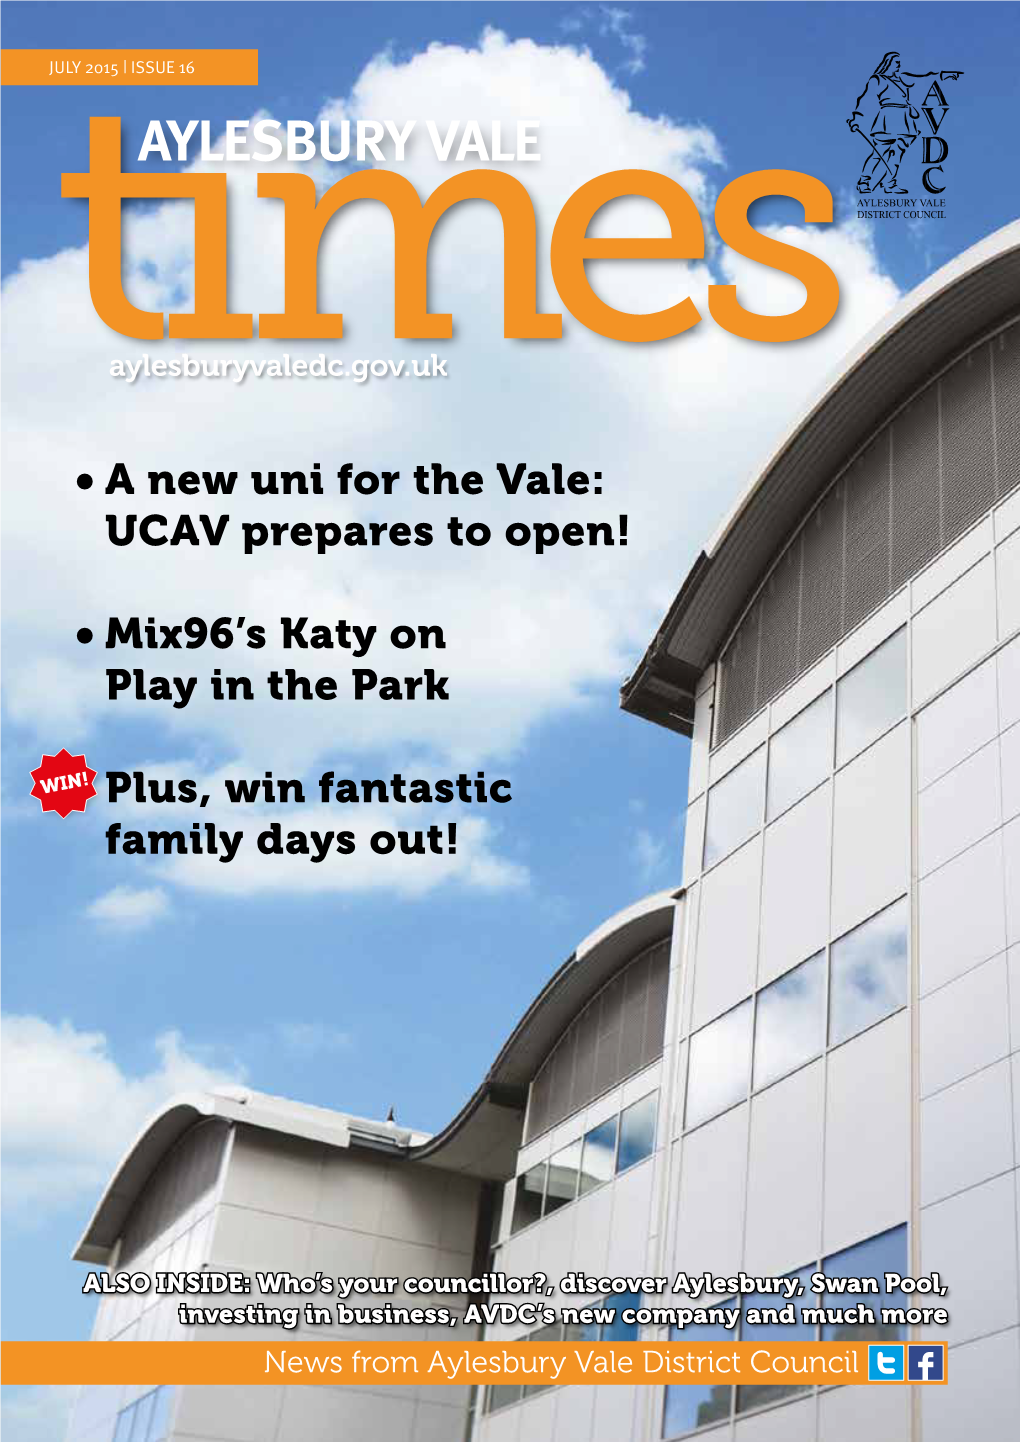 Aylesbury Vale Times Is a Publication from Aylesbury Vale 01296 585858 (Main Switchboard) District Council